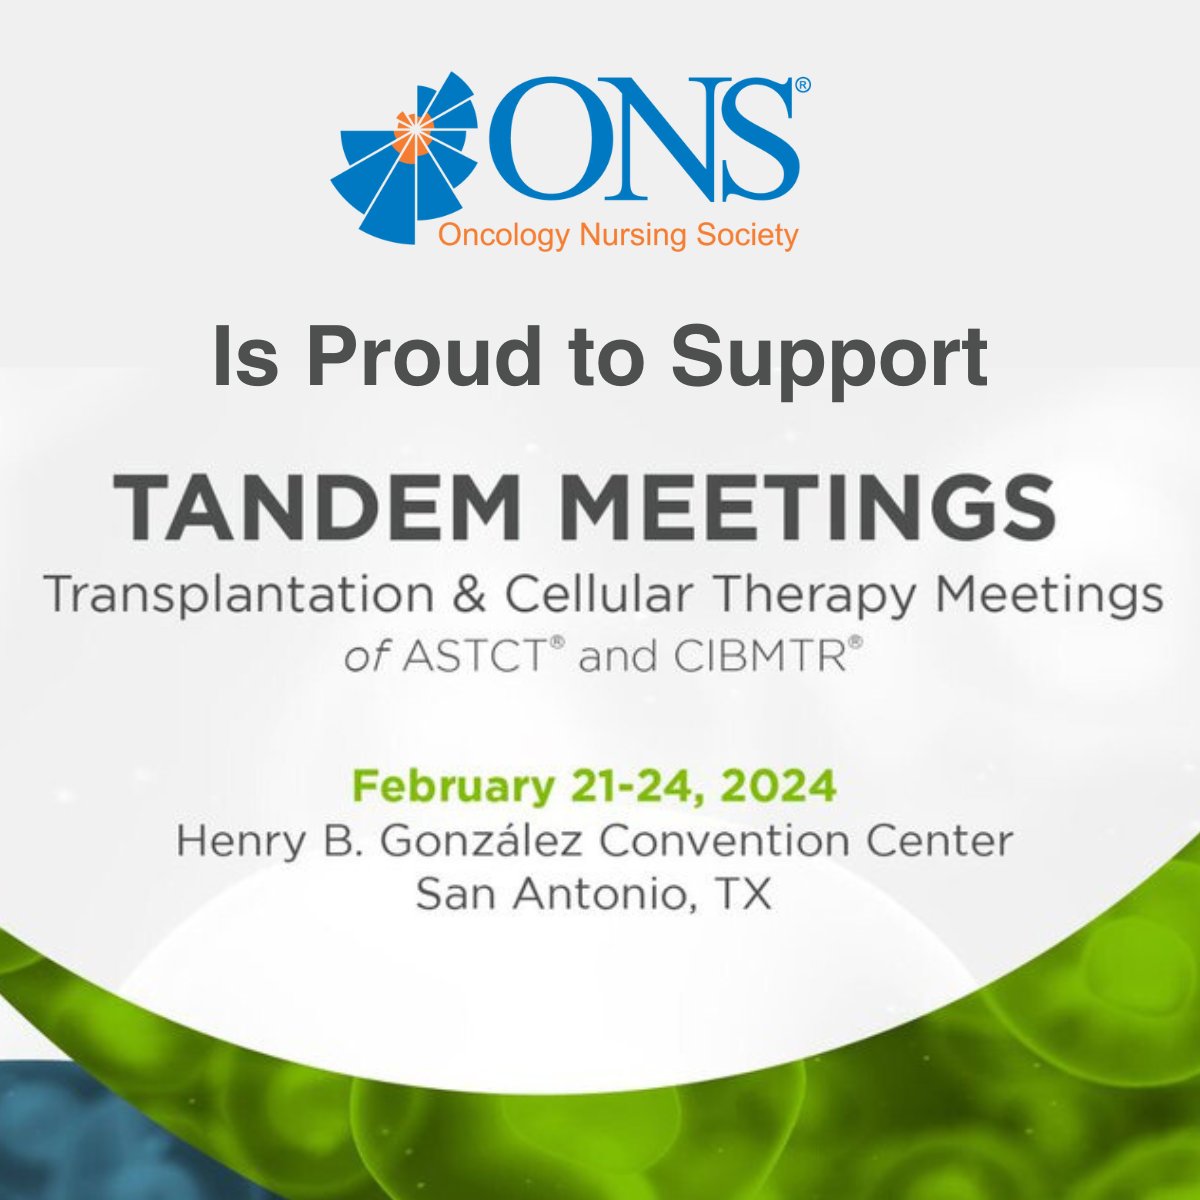 ONS is proud to support the ASTCT and CIBMTR Tandem conference! We're helping shape education for Transplant and Cellular Therapy nurses, and offering NCPD and ILNA points to support nursing licensure and certification. #ONSsupport #Tandem24 bit.ly/49gqvbO